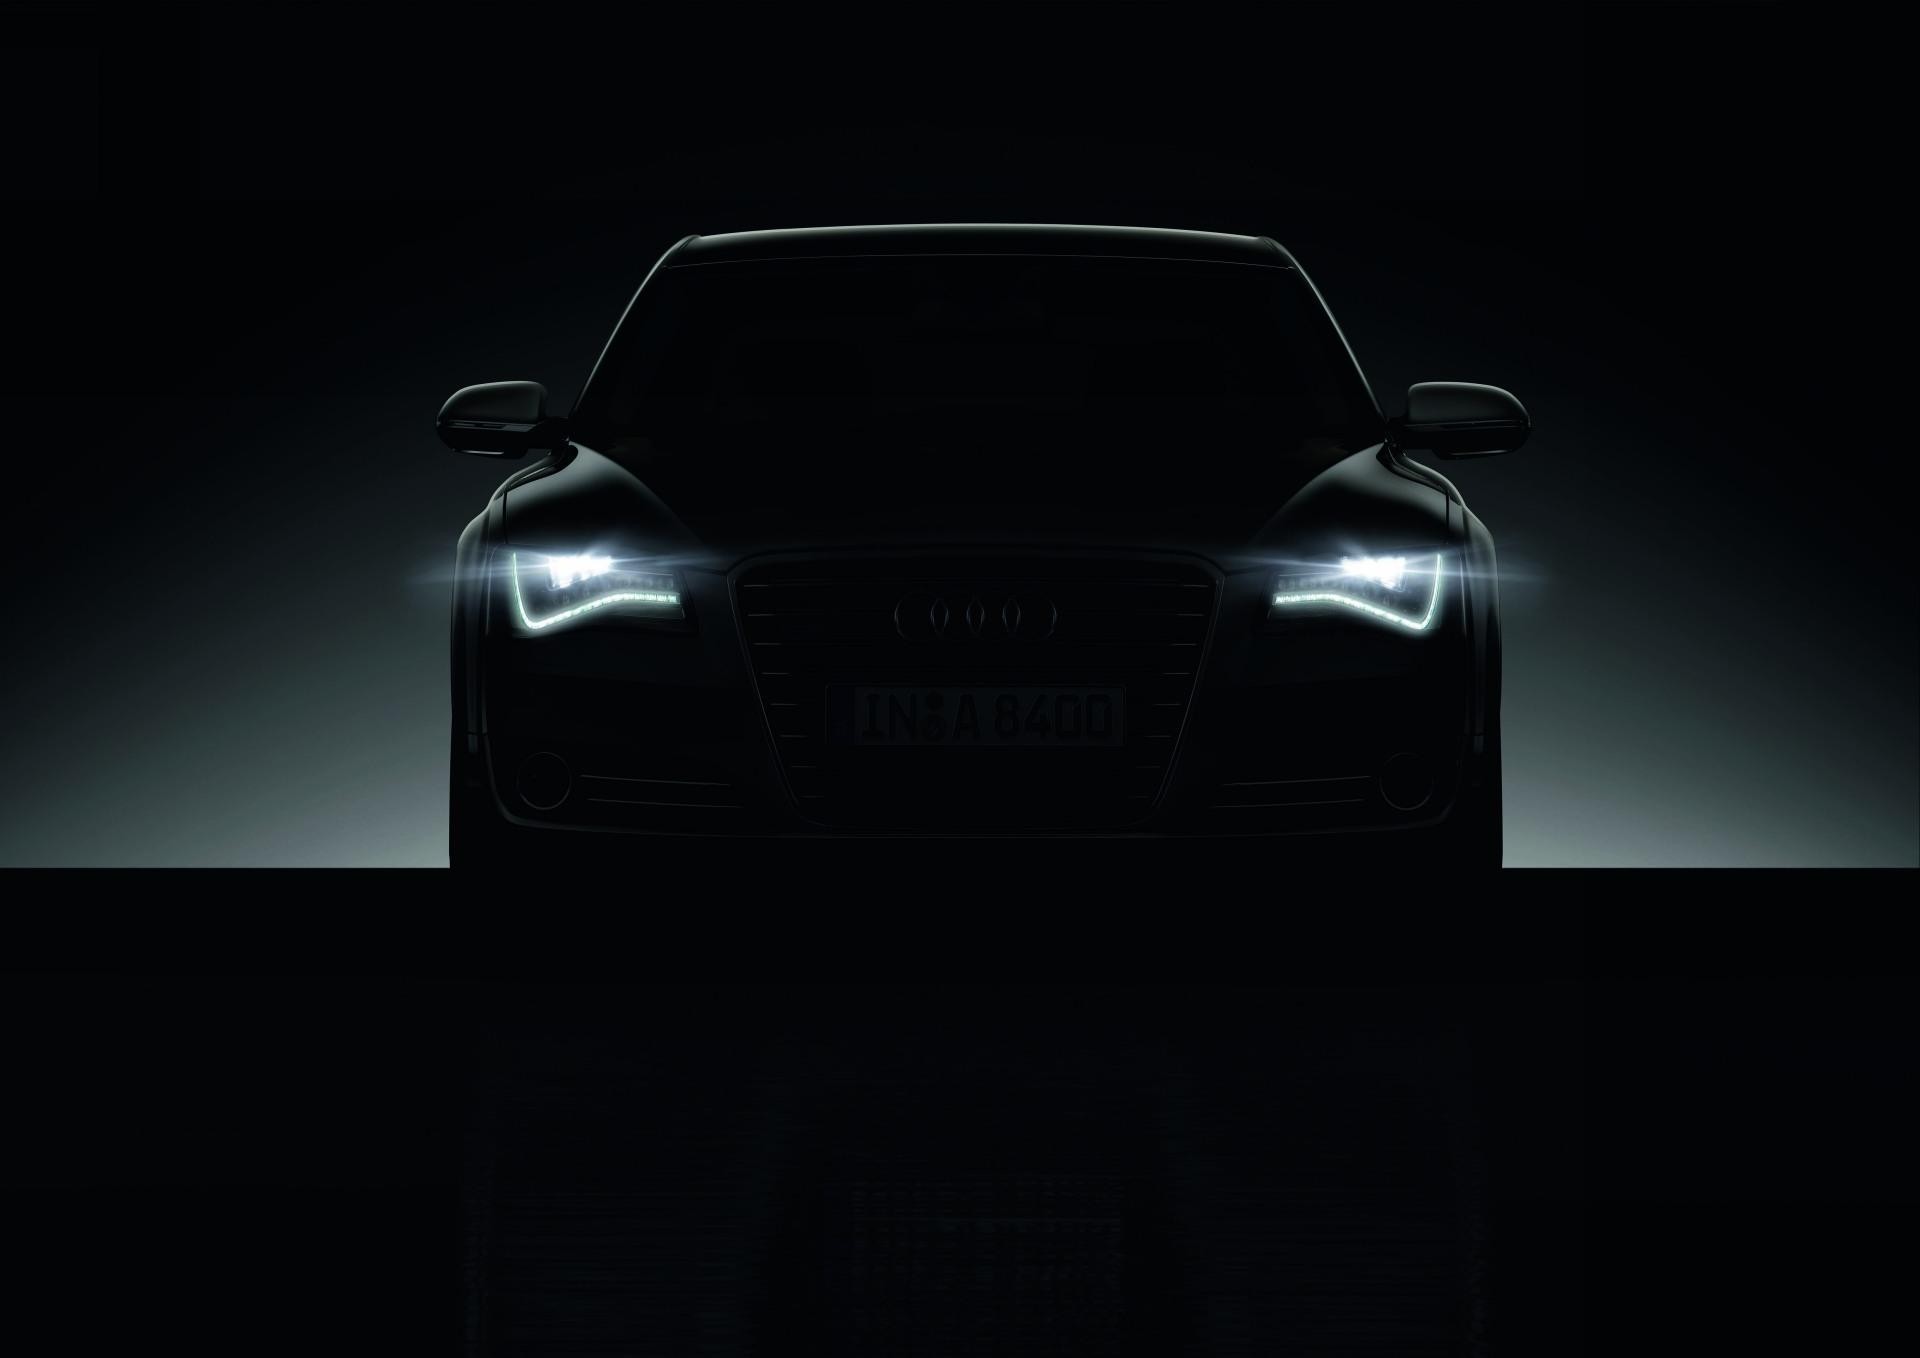 Free photo Audi car silhouette with diode optics on